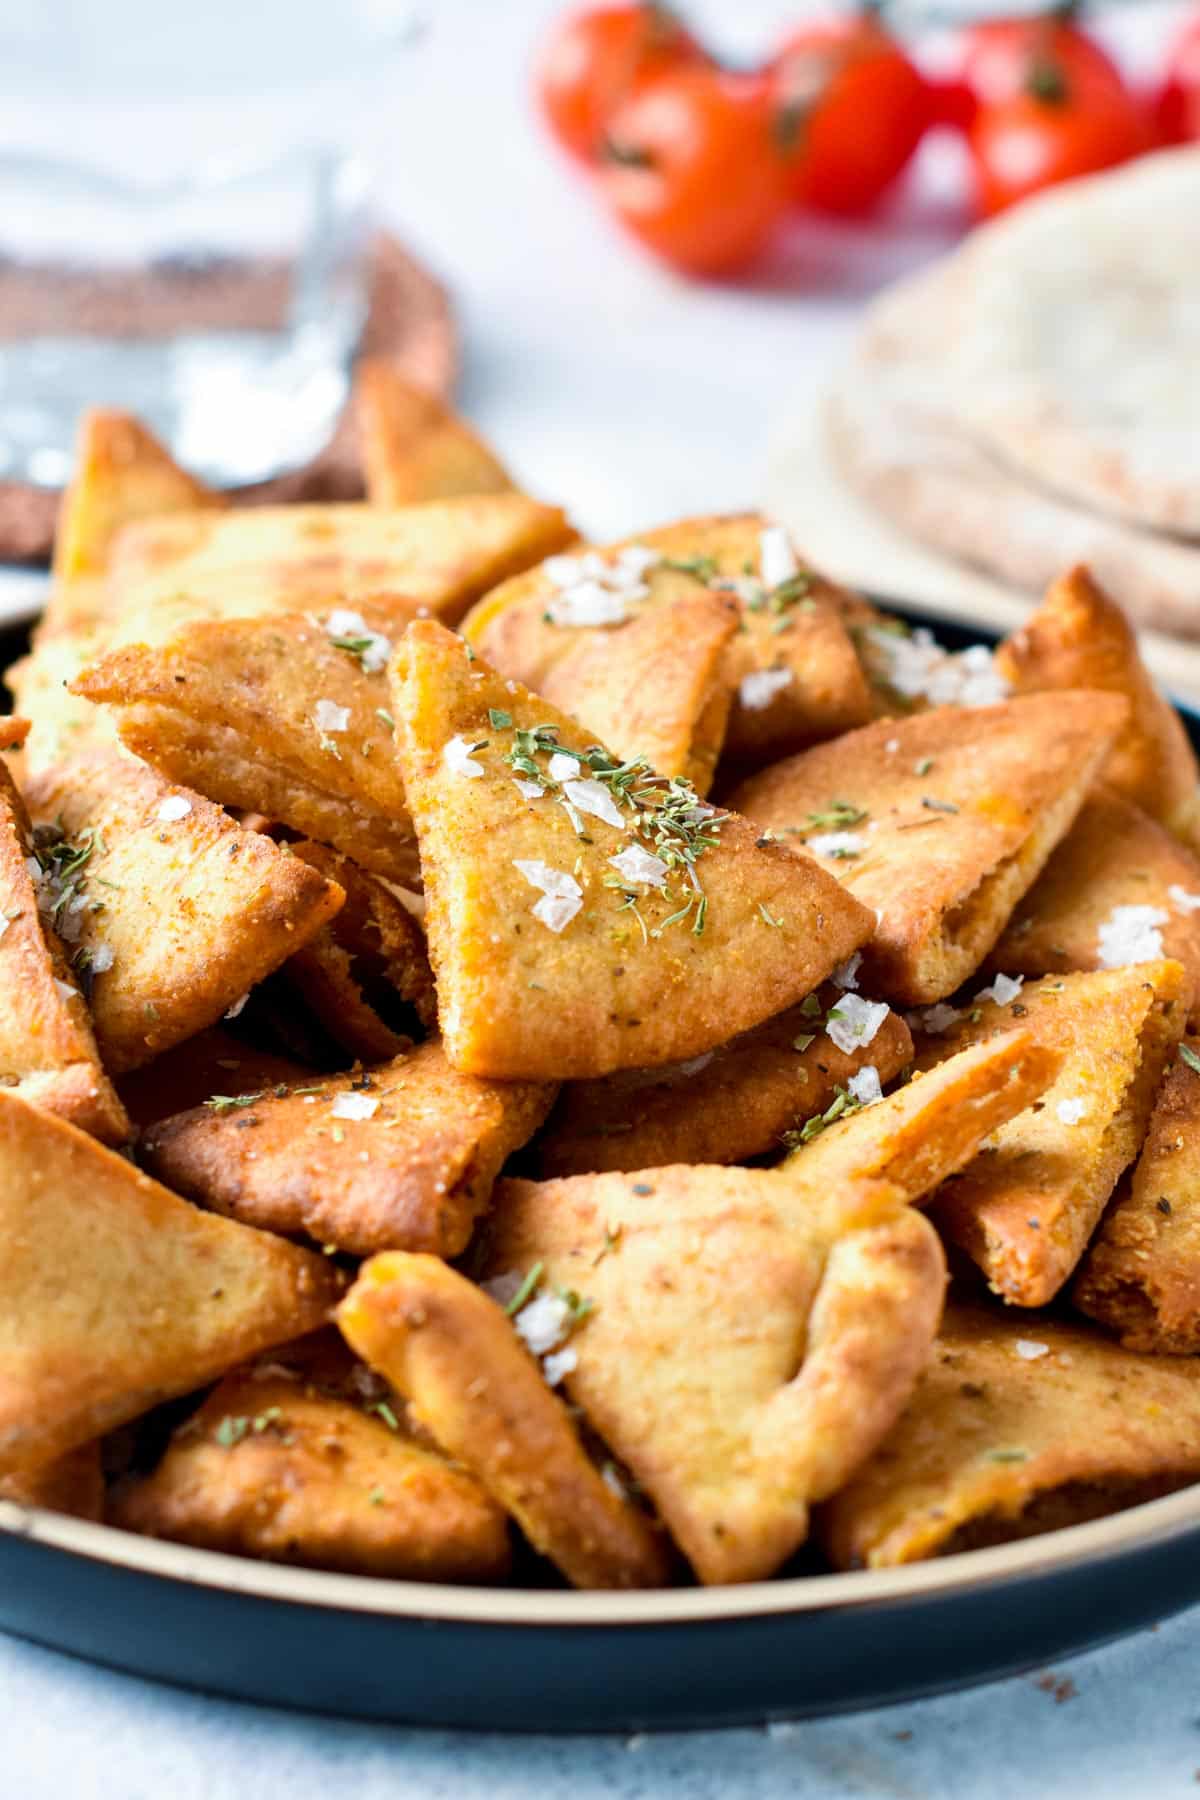 These Homemade Pita Chips are easy, crispy chips made from pita pocket bread and ready in less than 20 minutes. They are perfect the best homemade chips to dip in and serve on your appetizer food platter with raw vegetable.These Homemade Pita Chips are easy, crispy chips made from pita pocket bread and ready in less than 20 minutes. They are perfect the best homemade chips to dip in and serve on your appetizer food platter with raw vegetable.